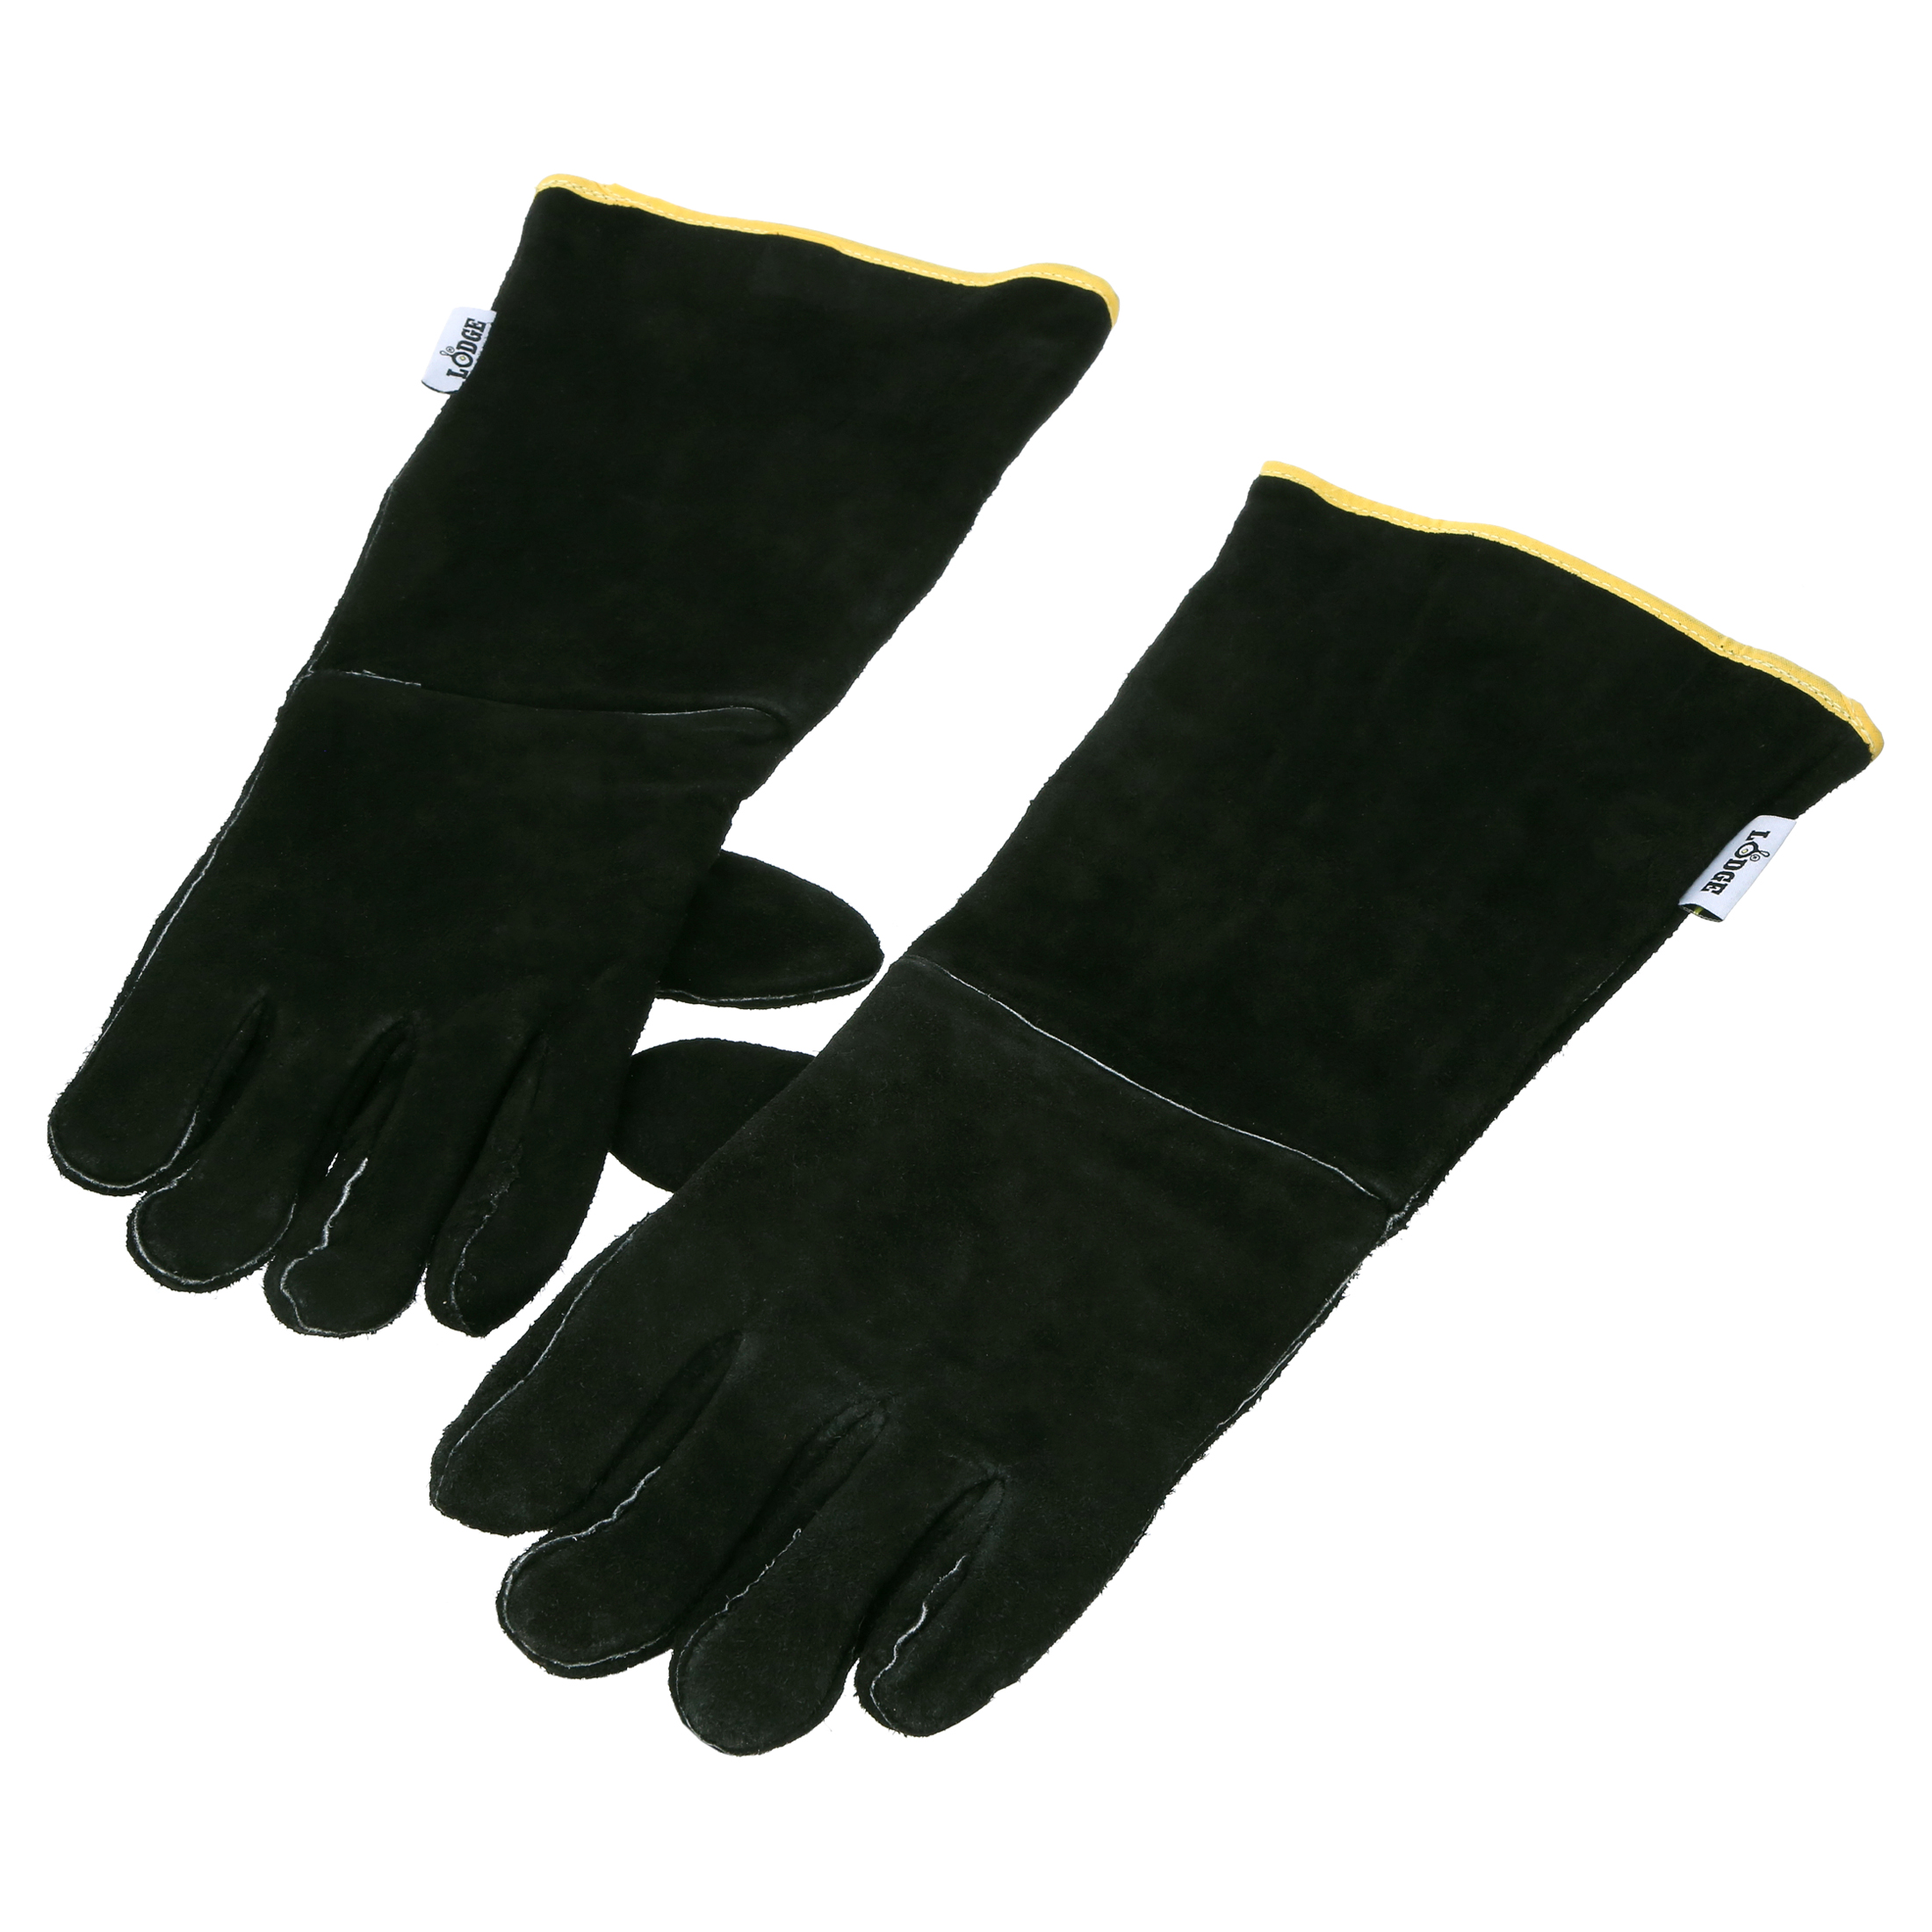 Lodge Cast Iron Logic Leather Gloves A5-2 - image 1 of 6